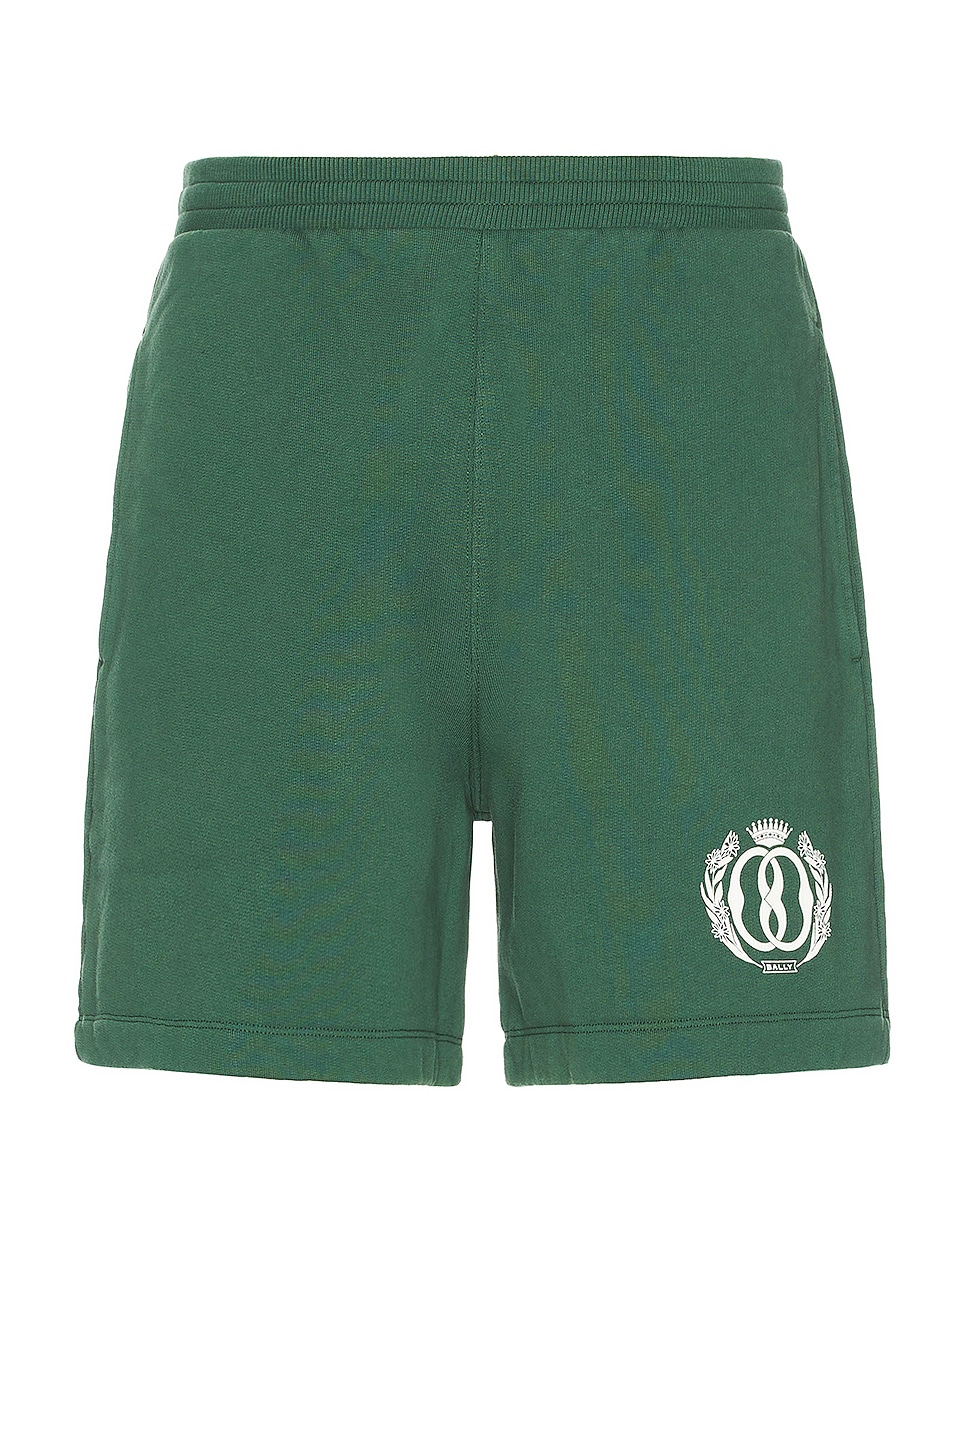 Image 1 of Bally Sweatpants in Kelly Green 50